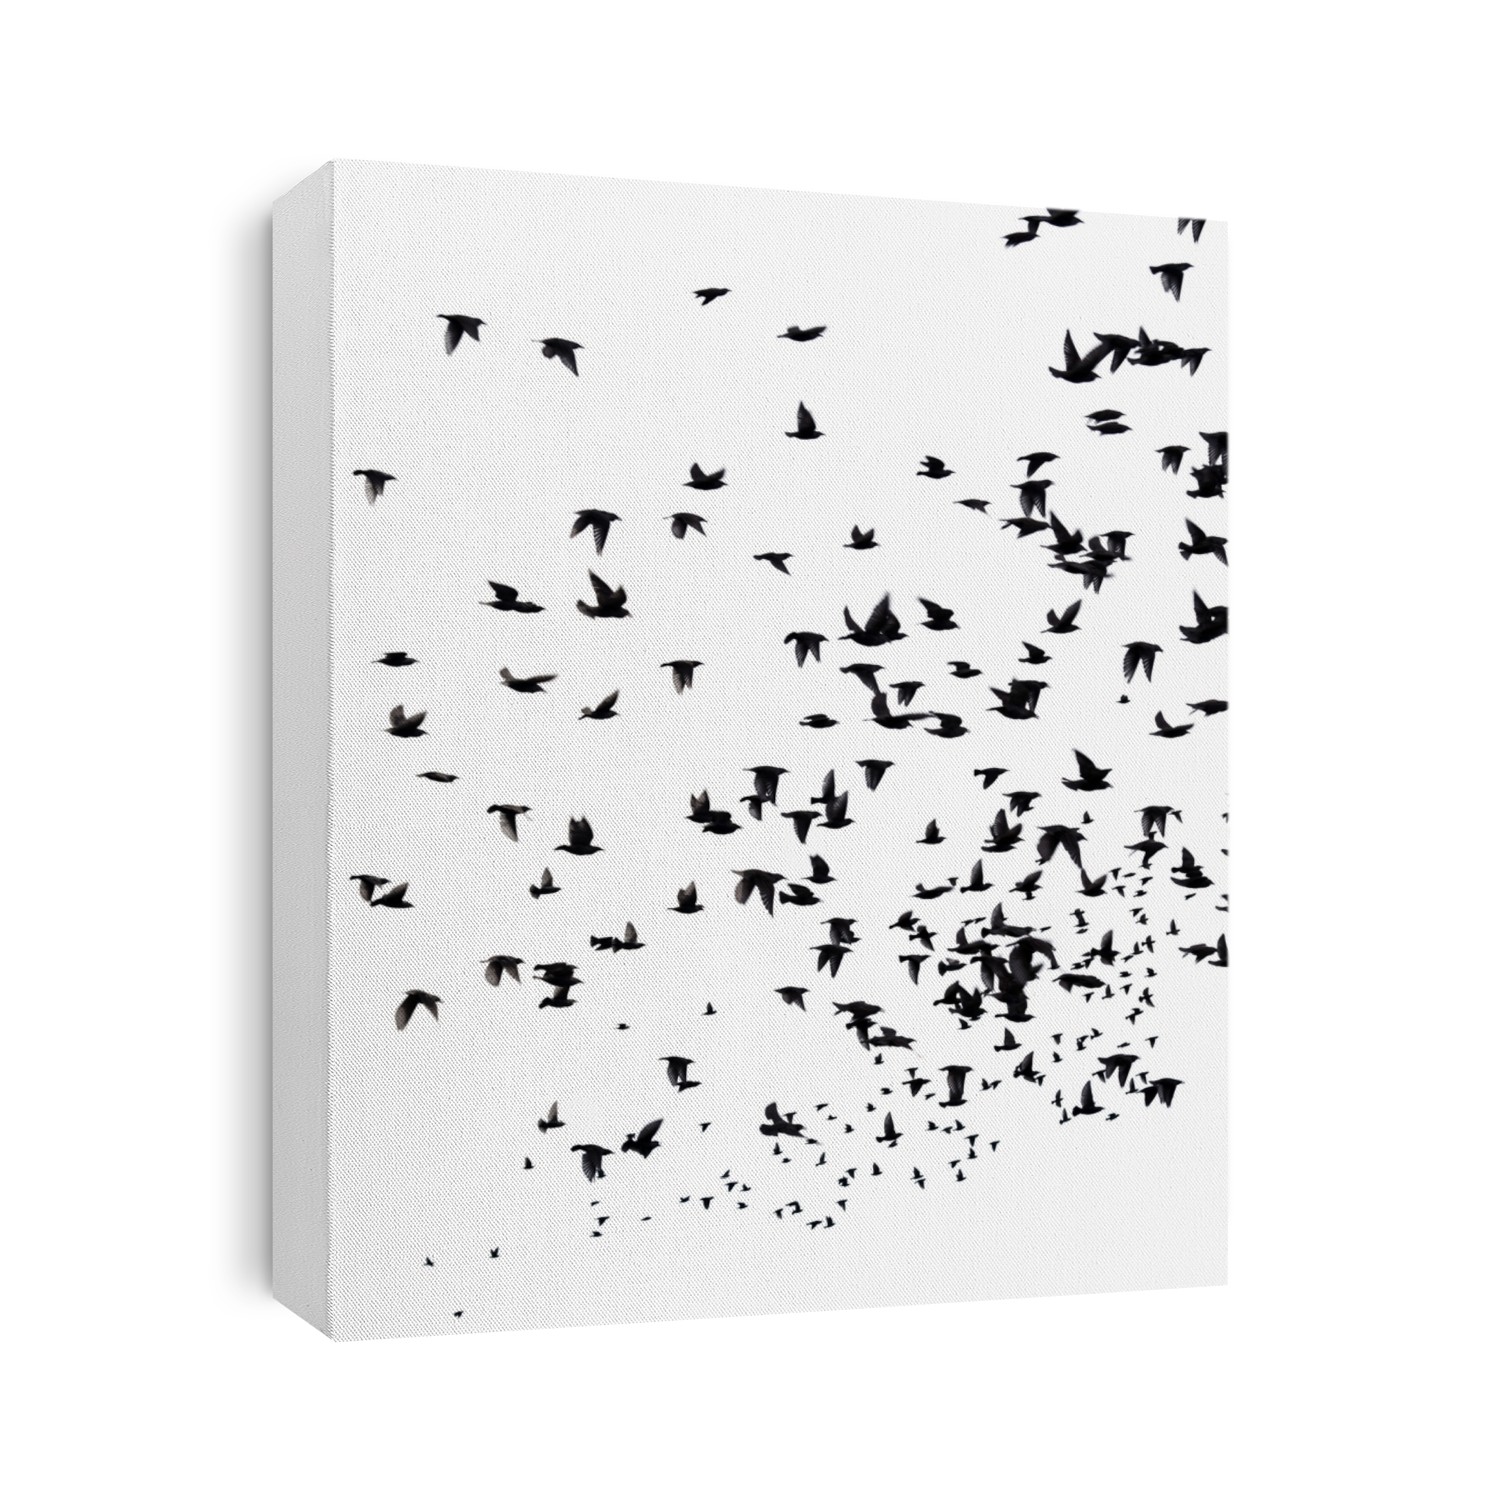 A flock of migratory birds. set of black silhouettes of birds flying in the sky. Isolated on white background, motion blur